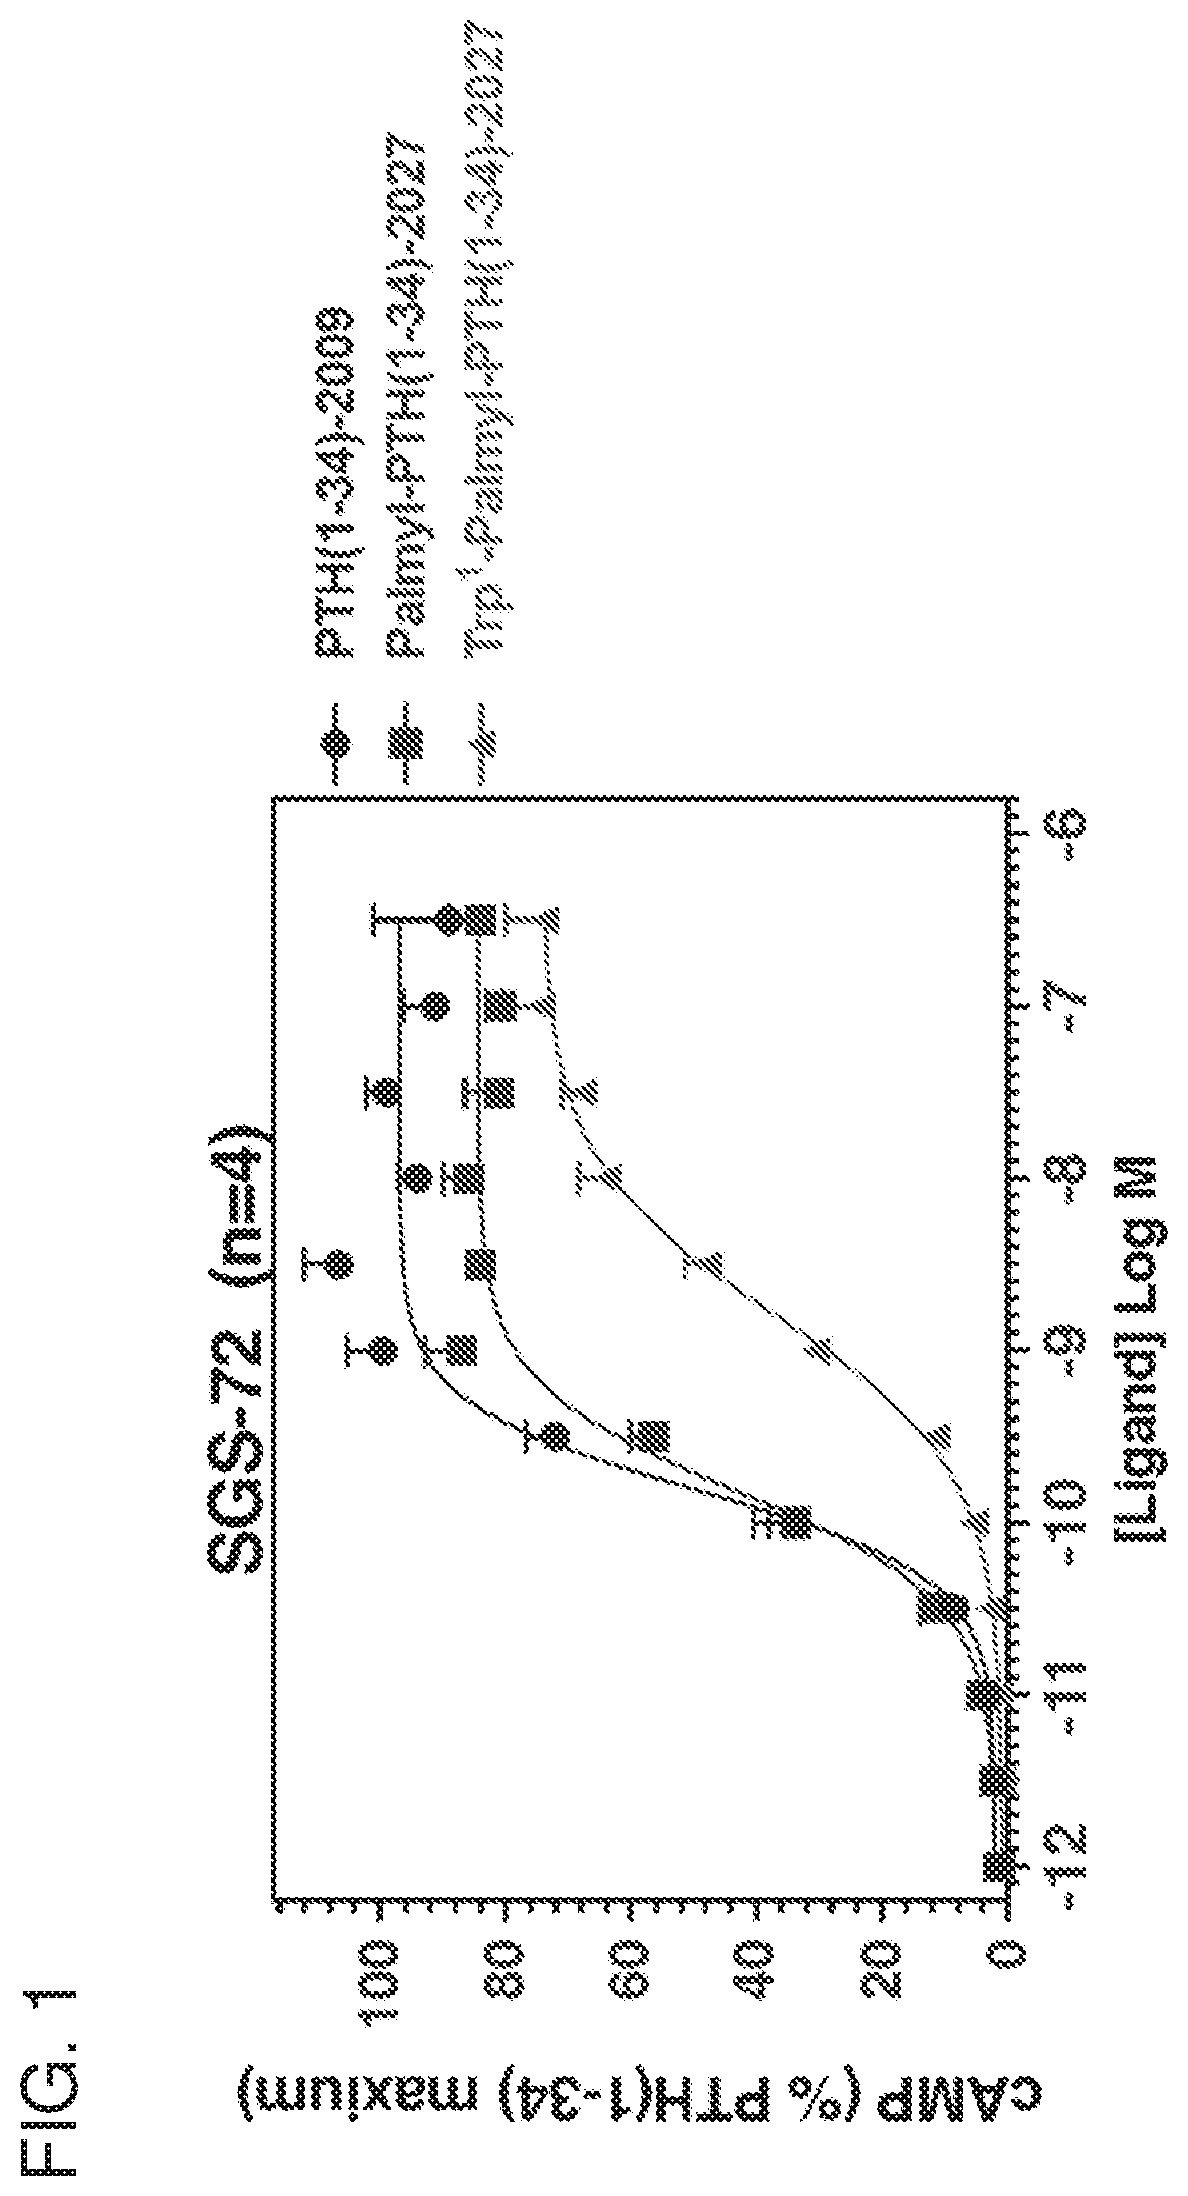 Parathyroid hormone polypeptide conjugates and methods of their use